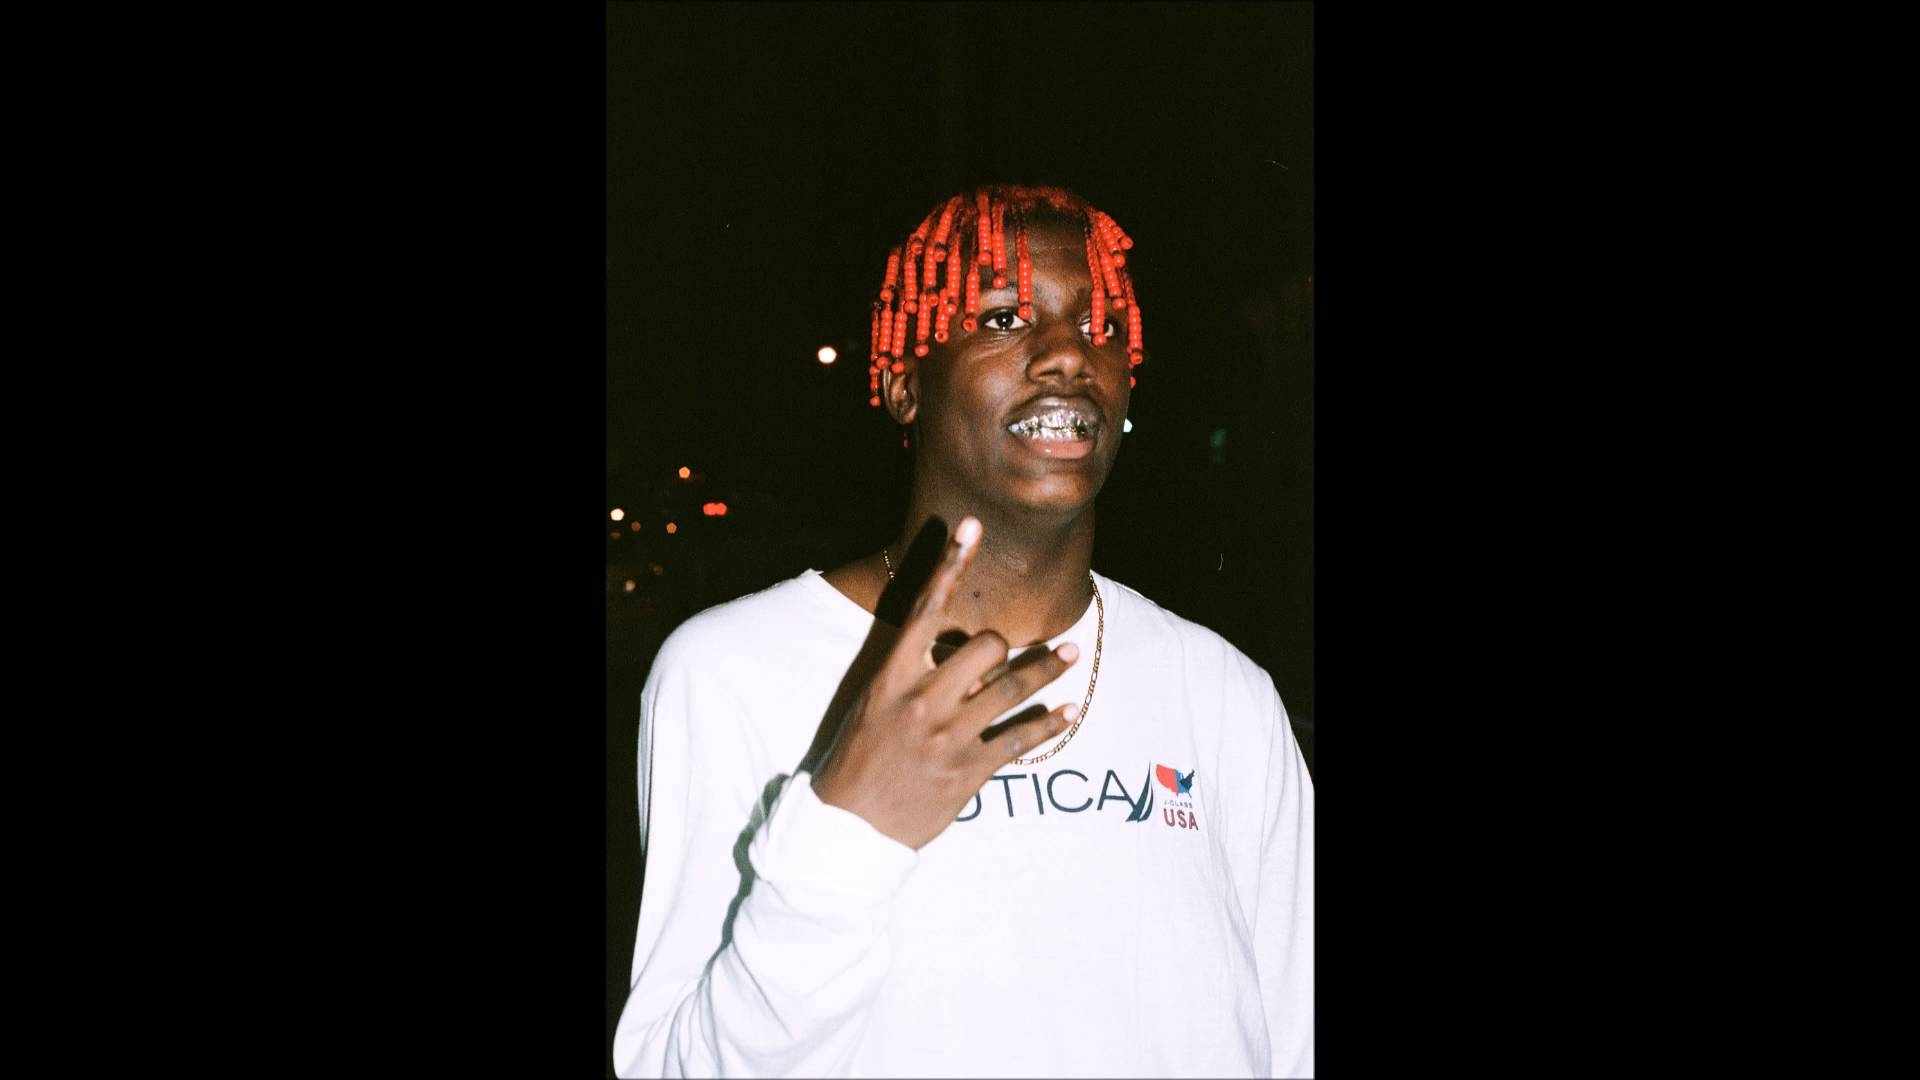 Rapper Lil Boat Wallpapers - Top Free